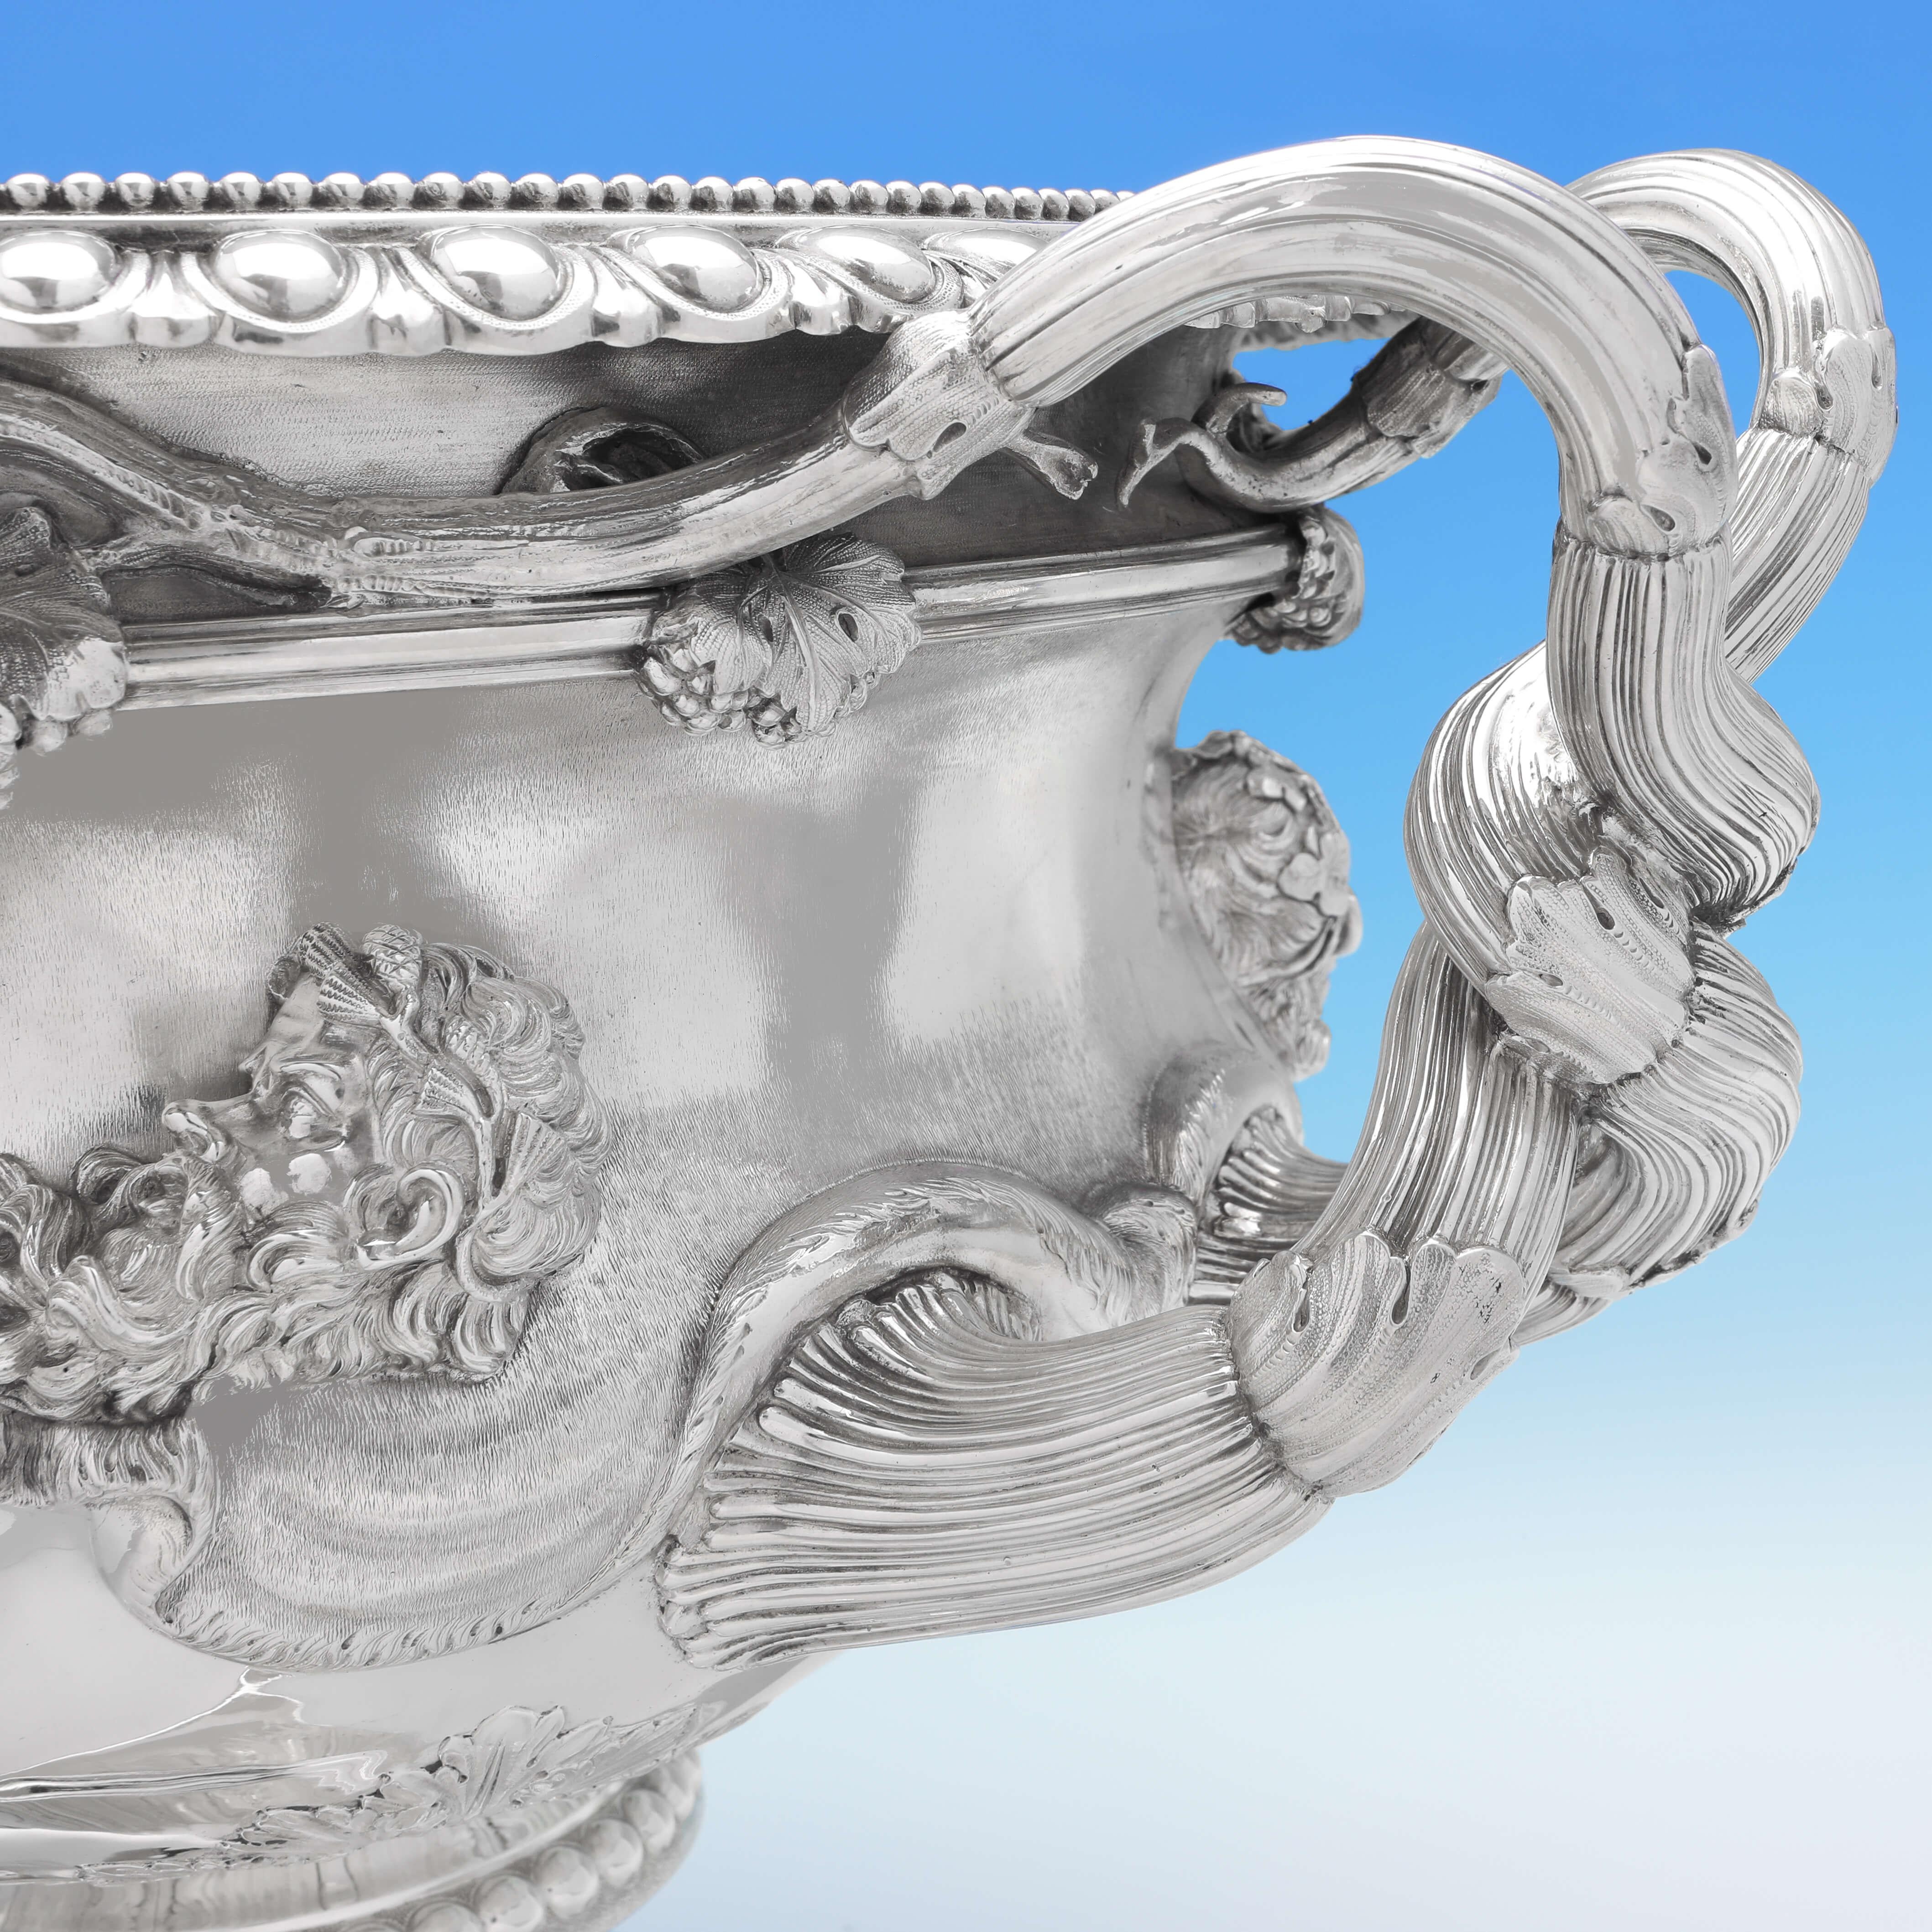 British 'The Allenby Cup' a Monumental Sterling Silver Warwick Vase by Barnards, 1906